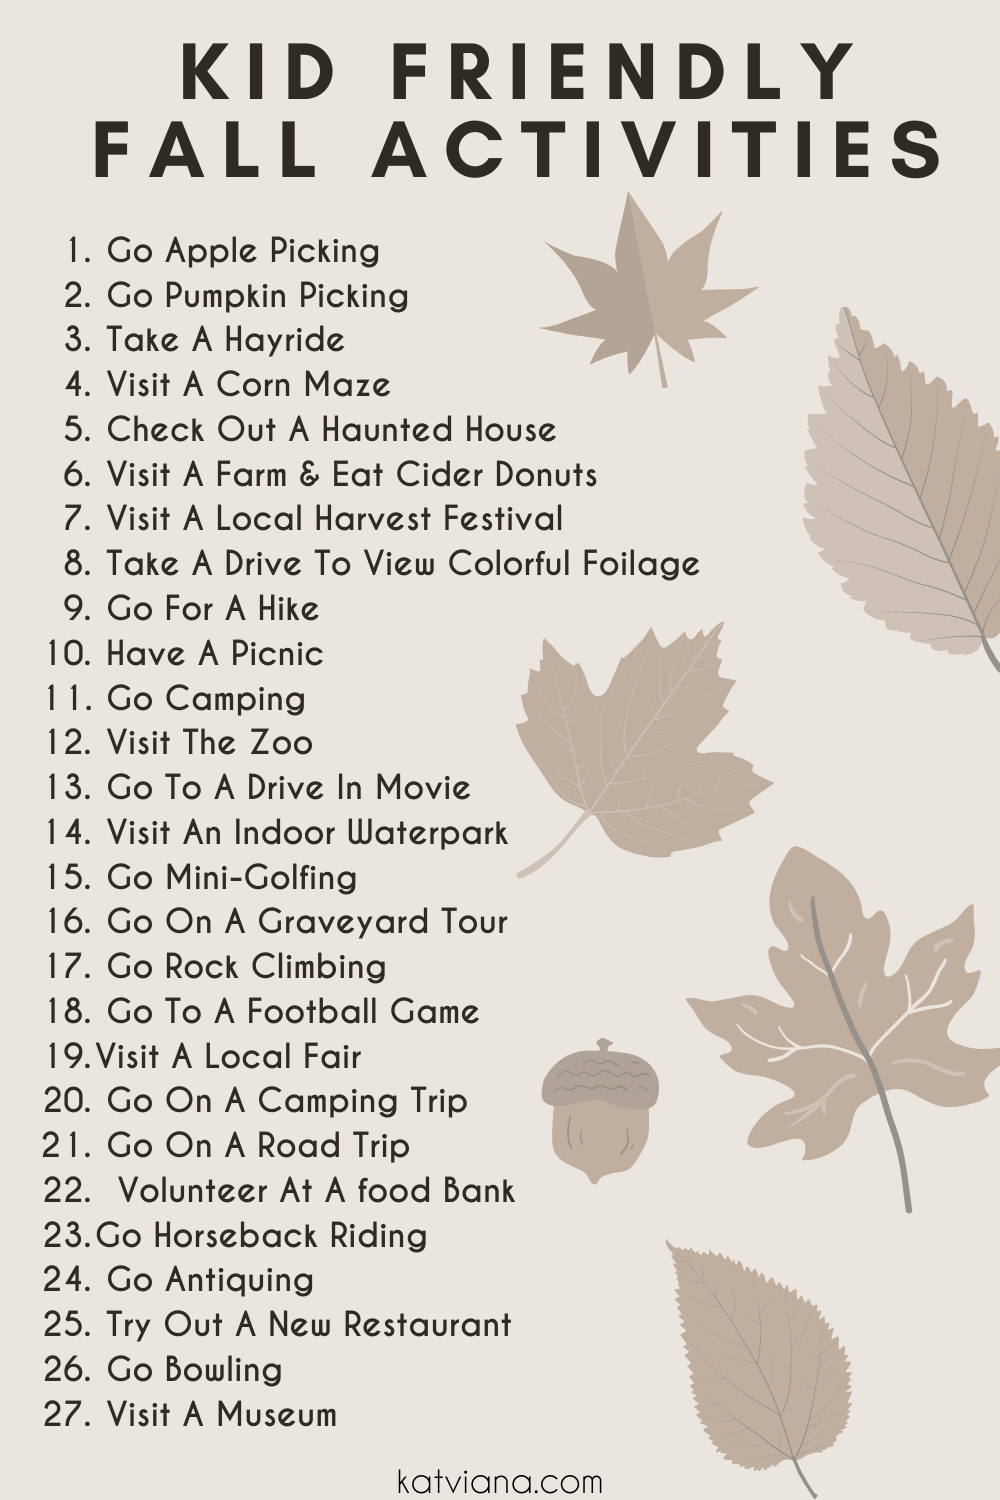 Outdoor Kid-Friendly Activities | 50+ Fall Activities To Do With Your Family This Year | Kat Viana